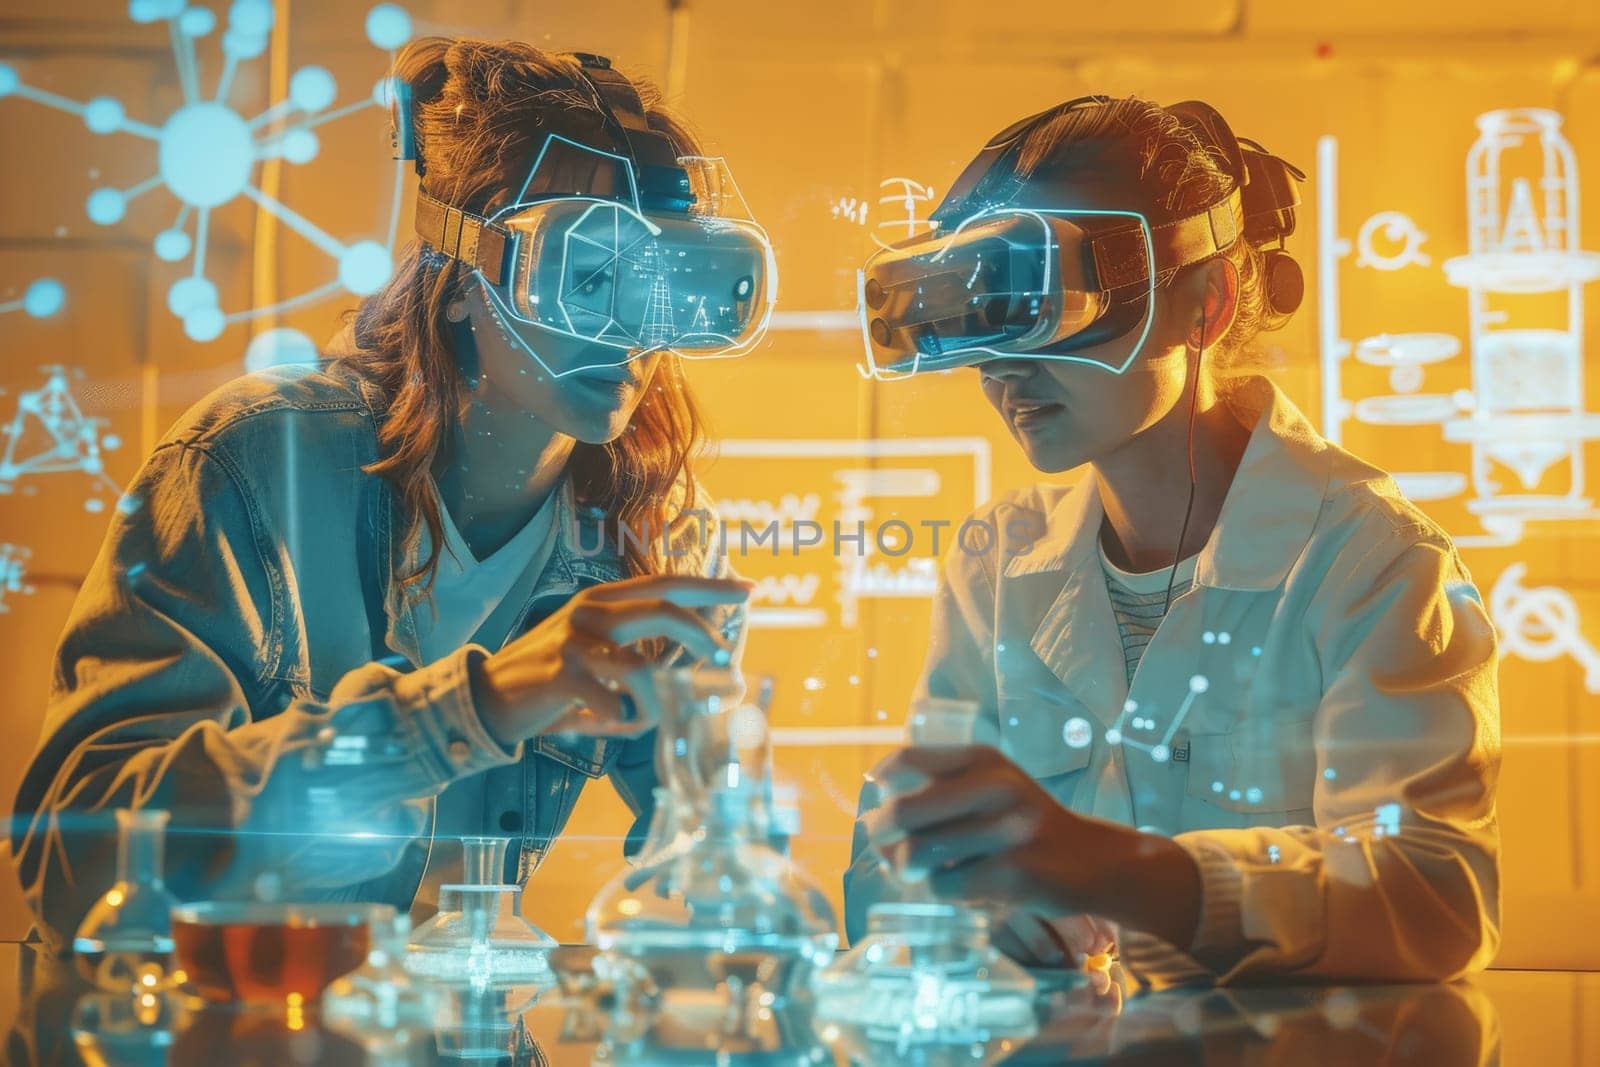 Two people wearing virtual reality goggles are working on a project. The scene is bright and colorful, with a lot of different shapes and patterns. Scene is energetic and futuristic